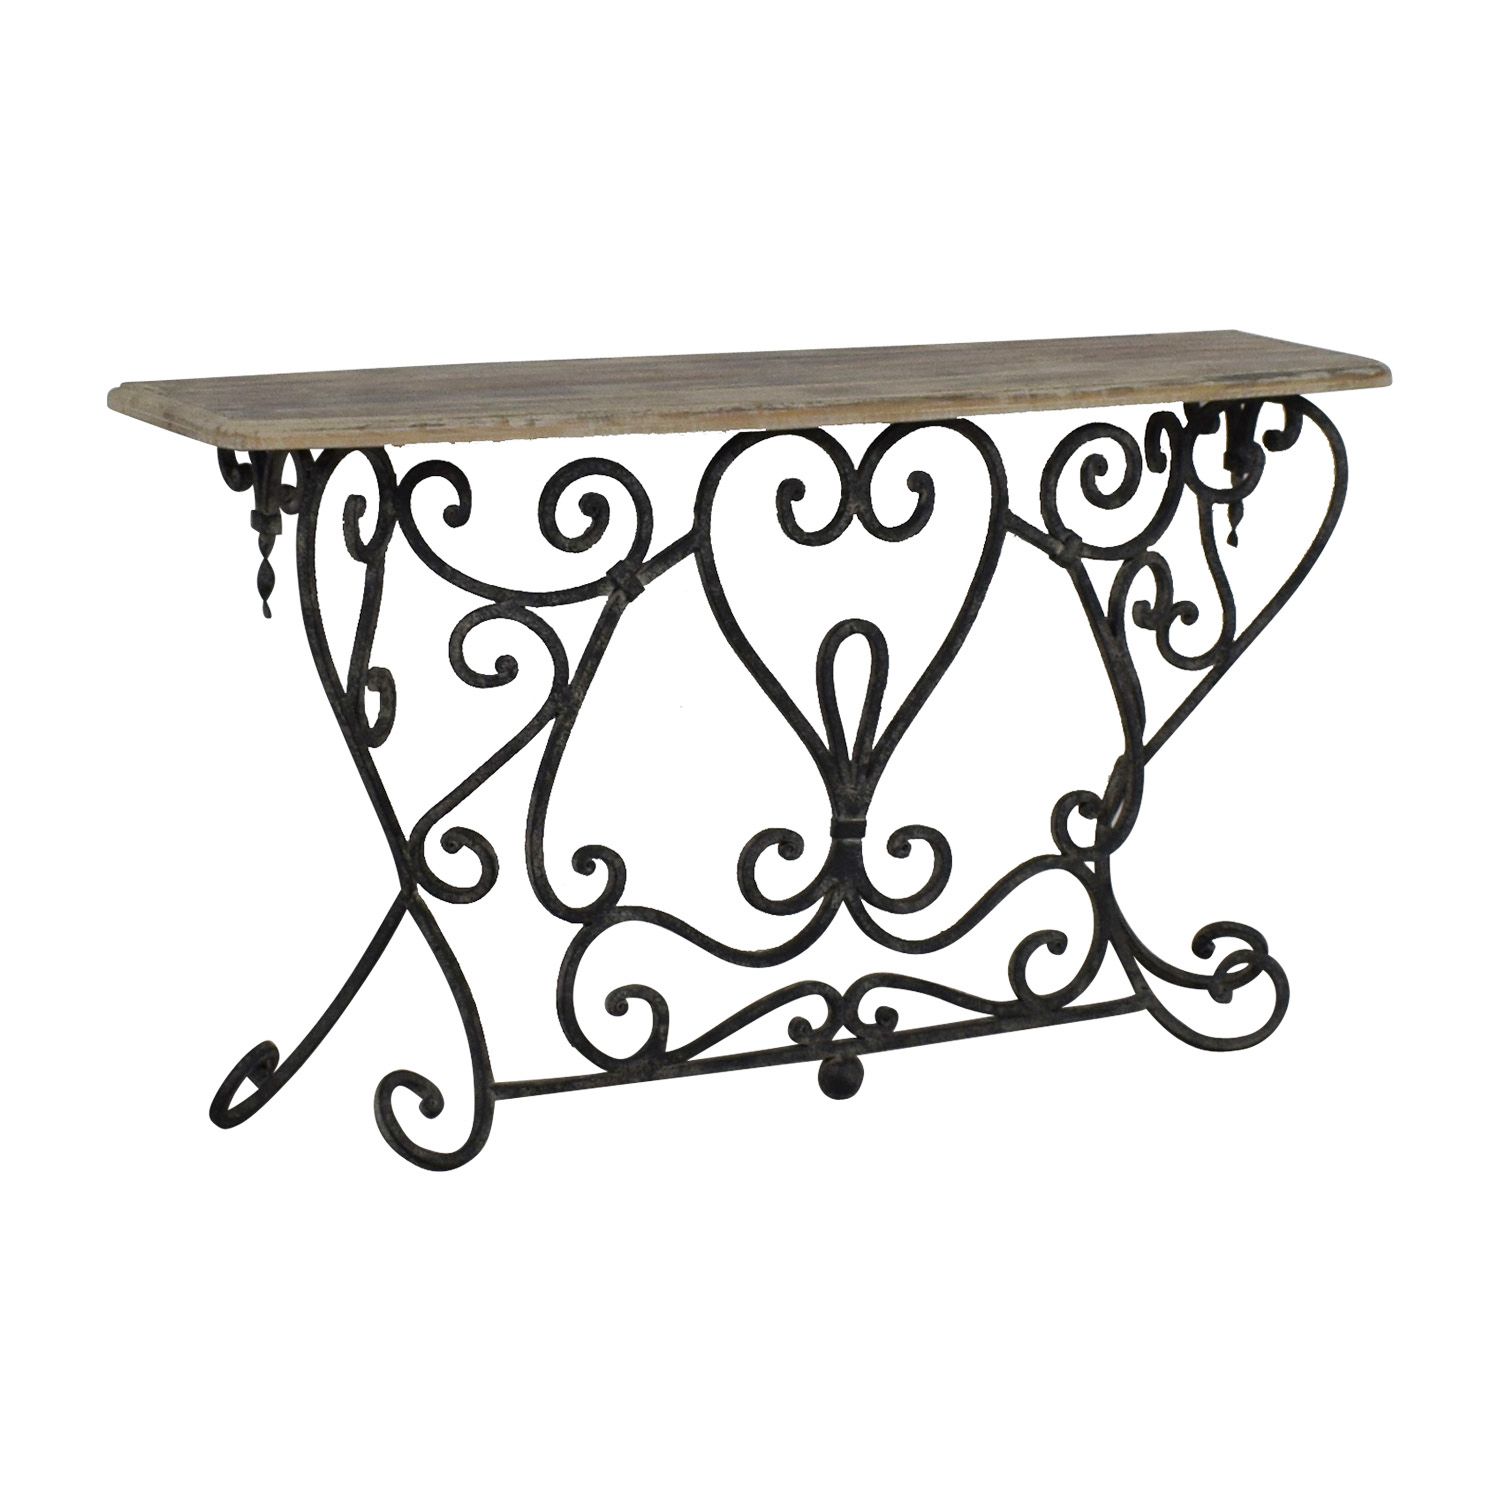 90% Off – Wrought Iron Console Table / Tables Regarding Wrought Iron Console Tables (View 12 of 20)